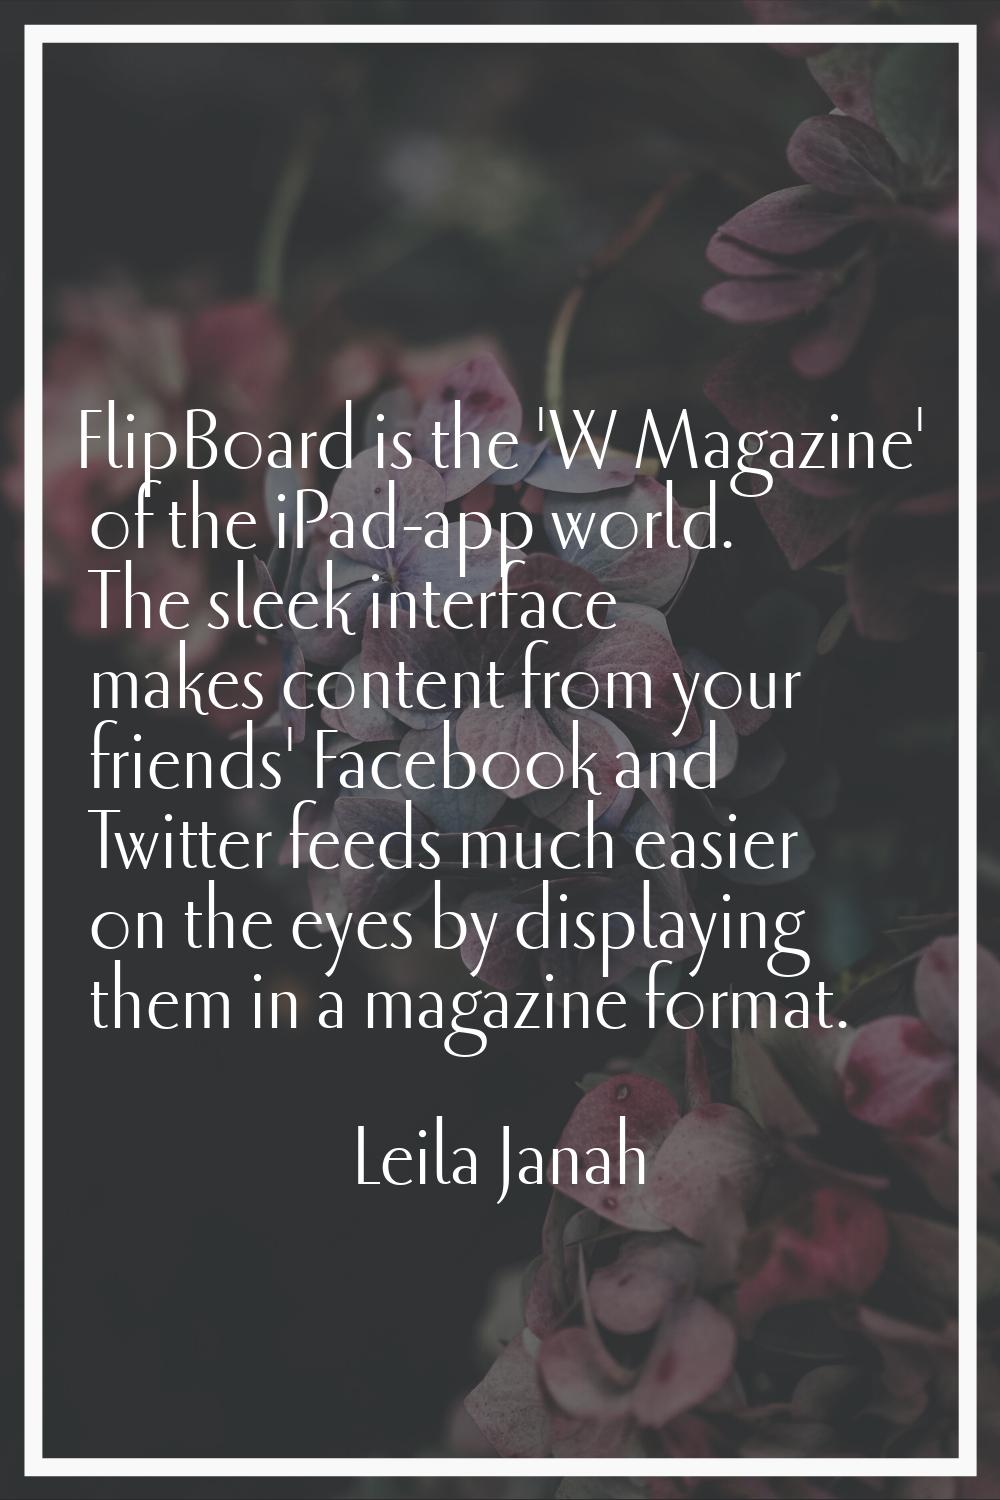 FlipBoard is the 'W Magazine' of the iPad-app world. The sleek interface makes content from your fr